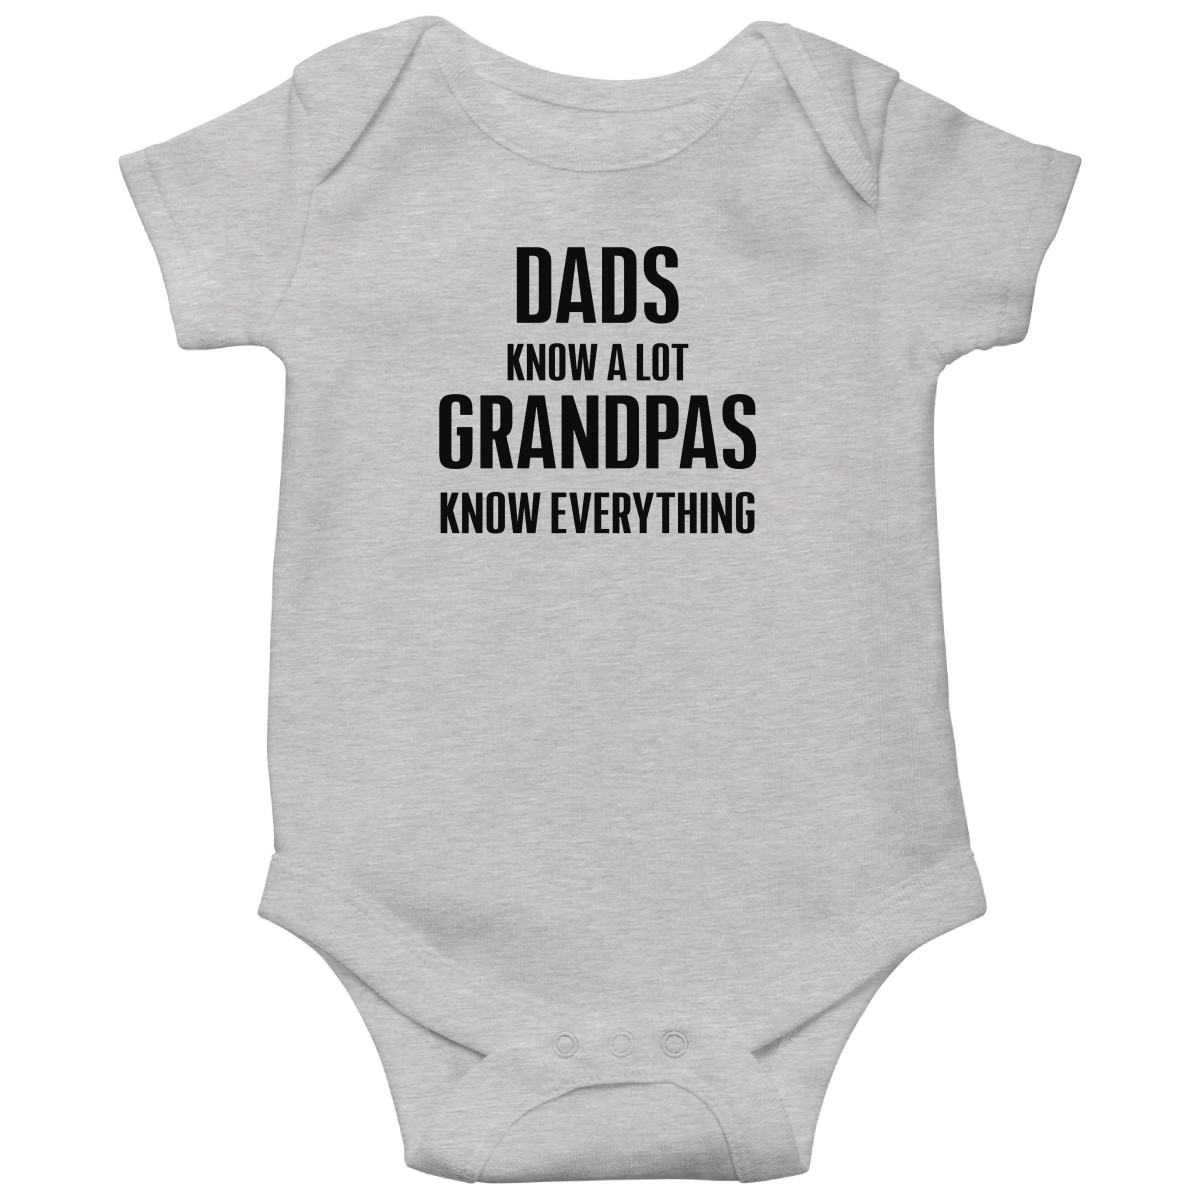 Dads know a lot Grandpas know everything  Baby Bodysuits | Gray